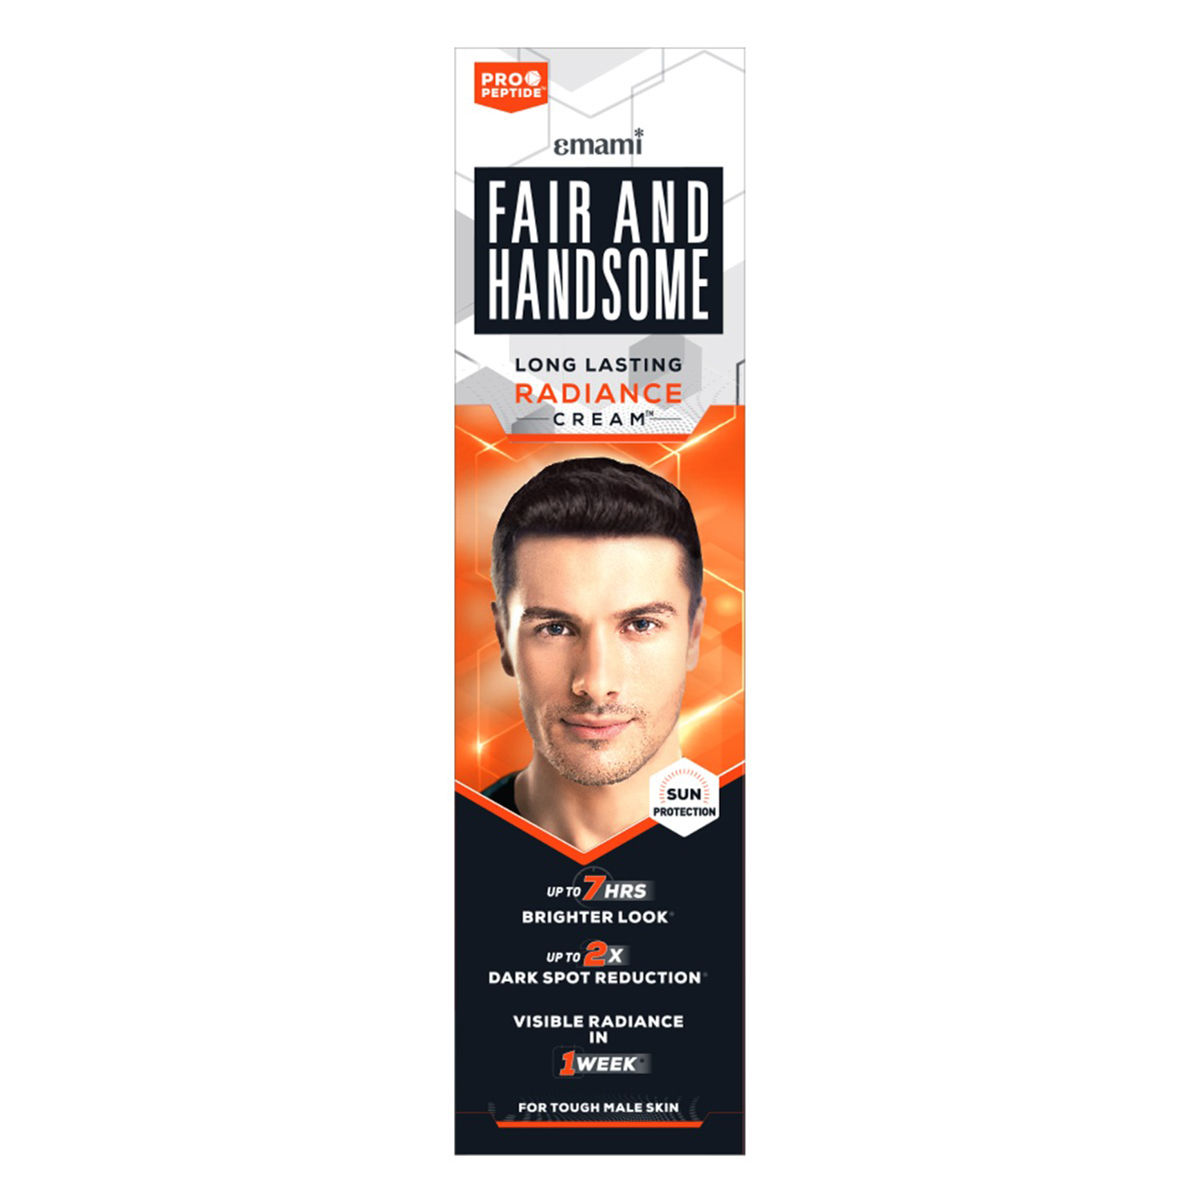 Buy Fair and Handsome Long Lasting Radiance Cream, 15 gm Online